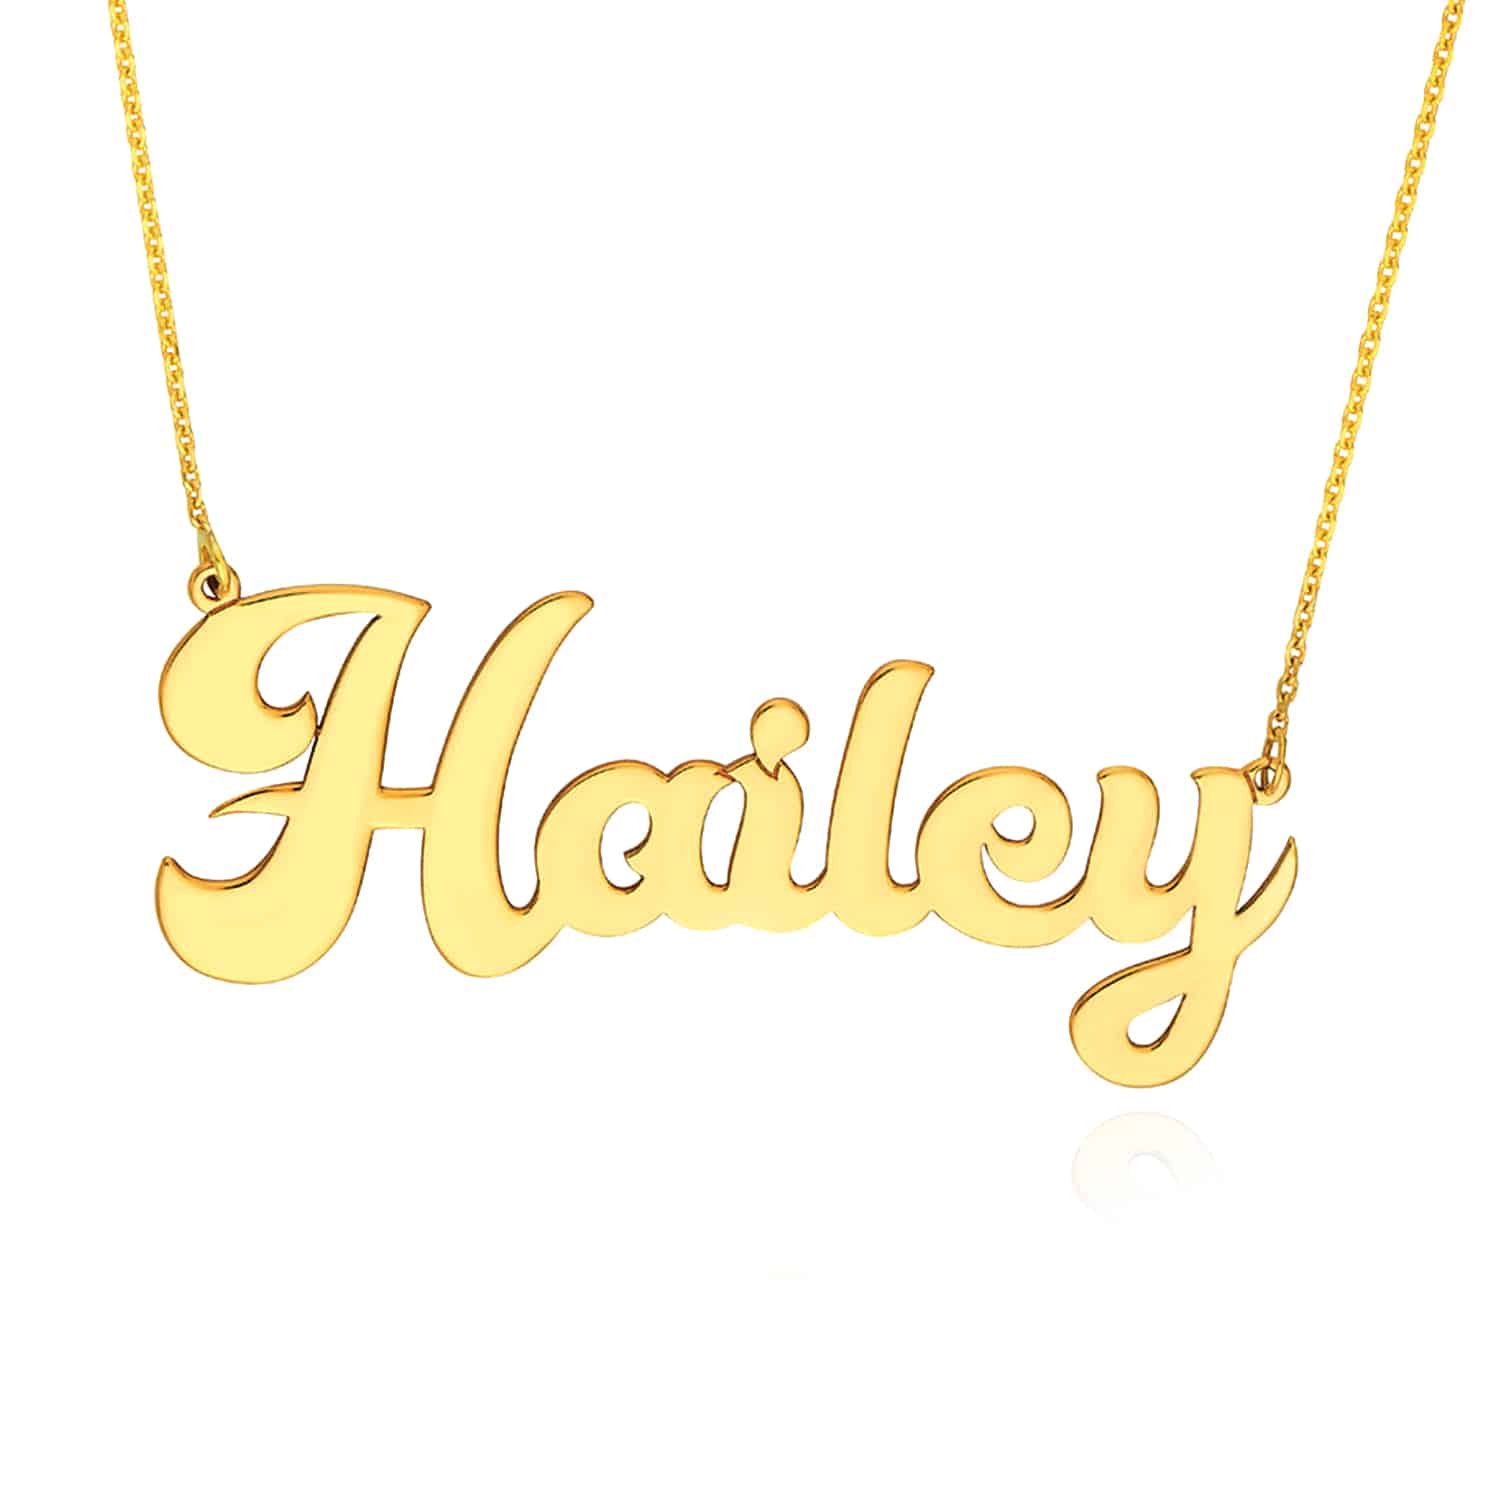 Customizable 14K Gold Yellow White Rose Cursive Style Nameplate Pendant Necklace - Yellow Gold, 14"-16" Adjustable